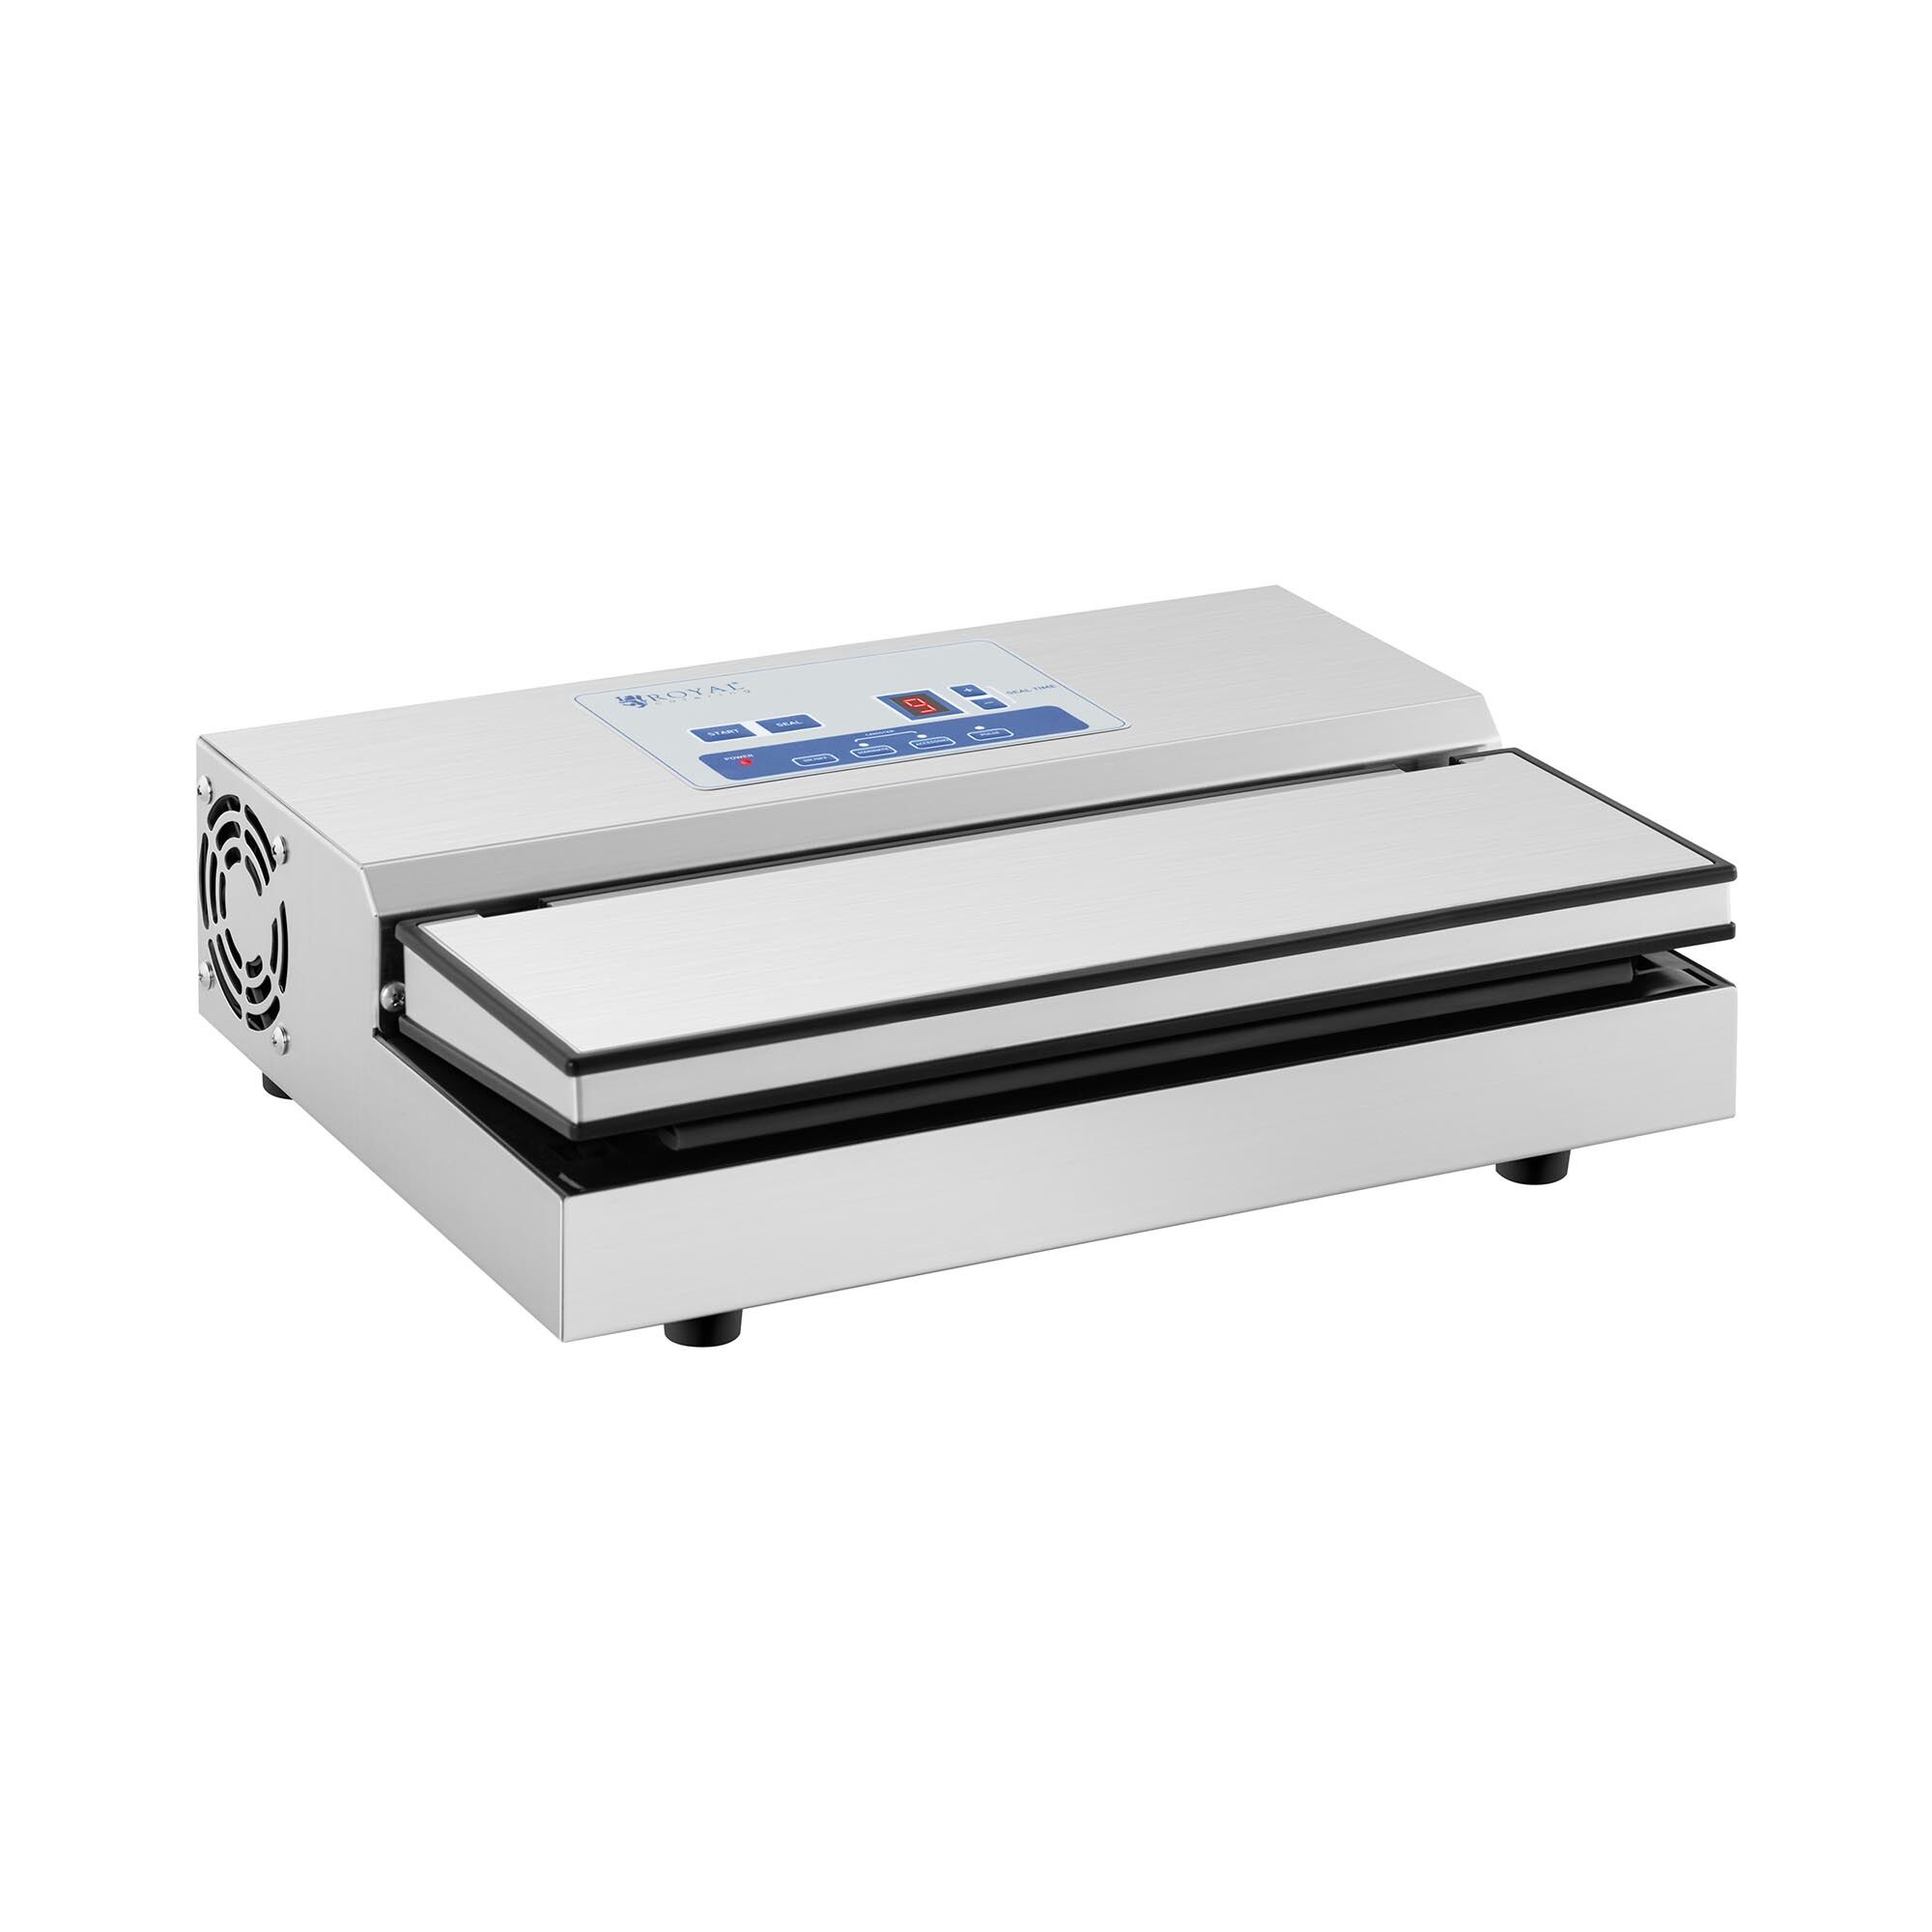 Royal Catering Vacuum Packing Machine - 440 W - 31 cm - stainless steel RCVG-41